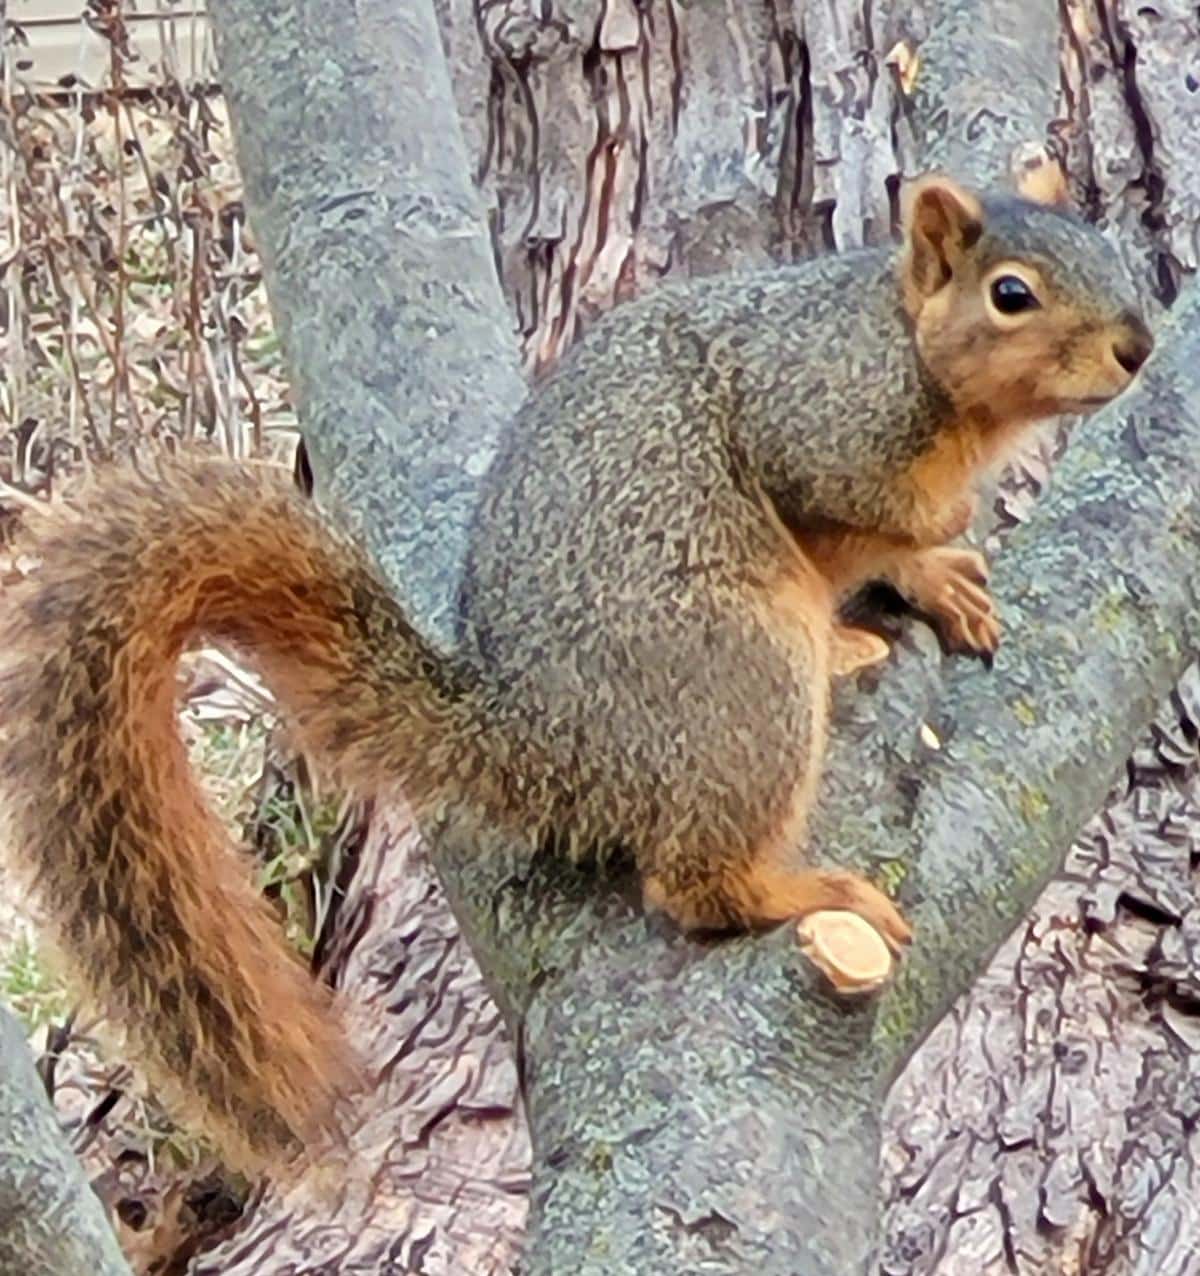 A squirrel in an apple tree